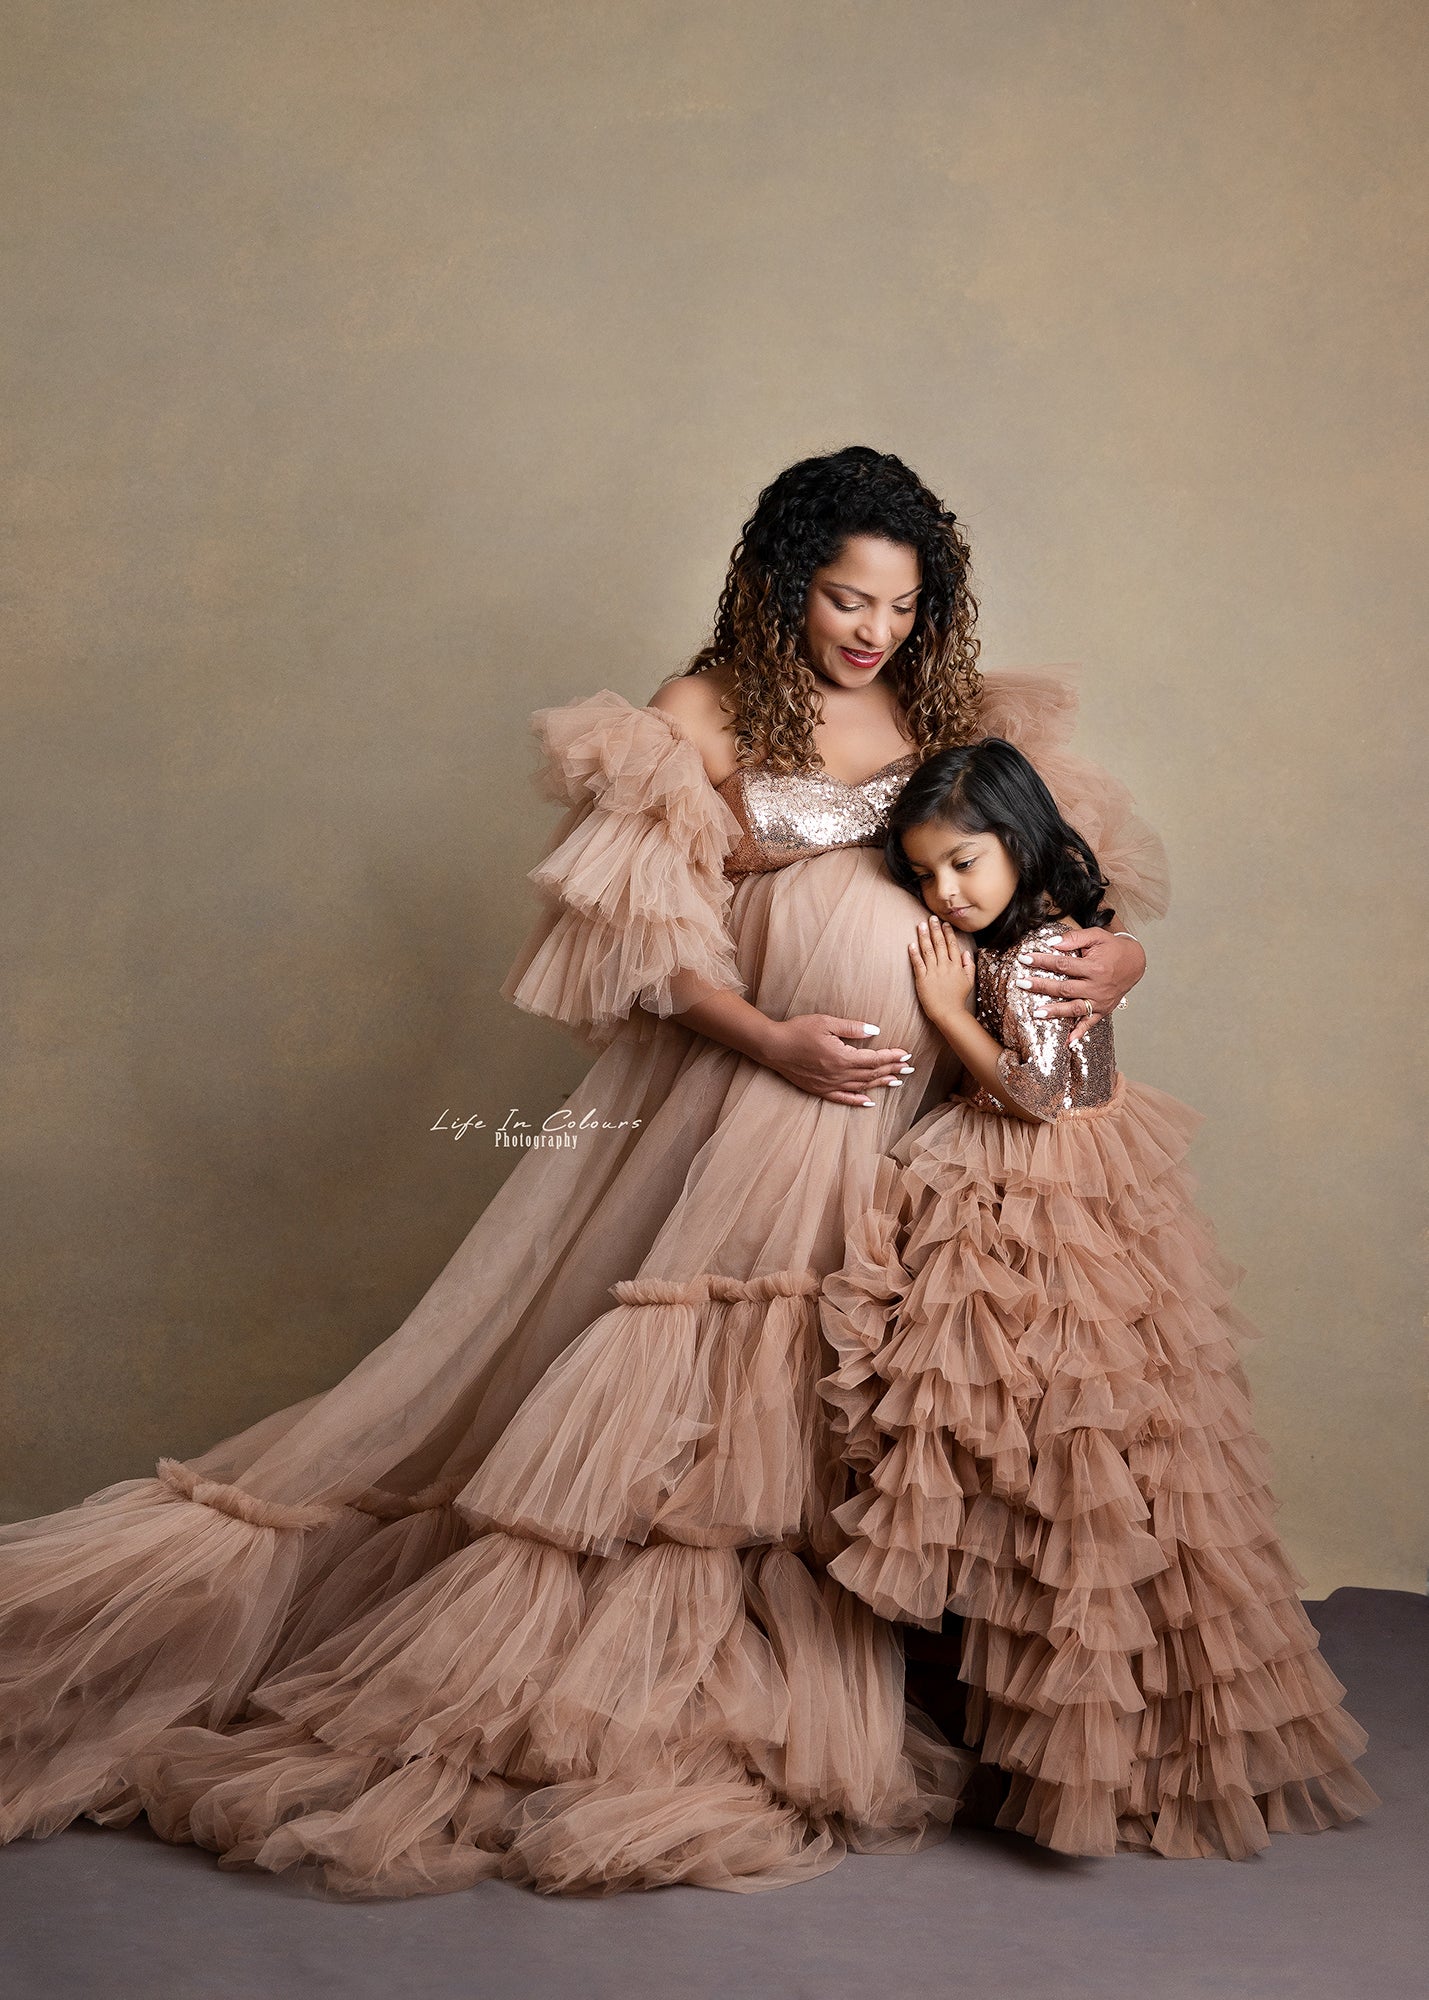 FOR HIRE / Rent Tulle Photoshoot Maternity Dress  Sparkle